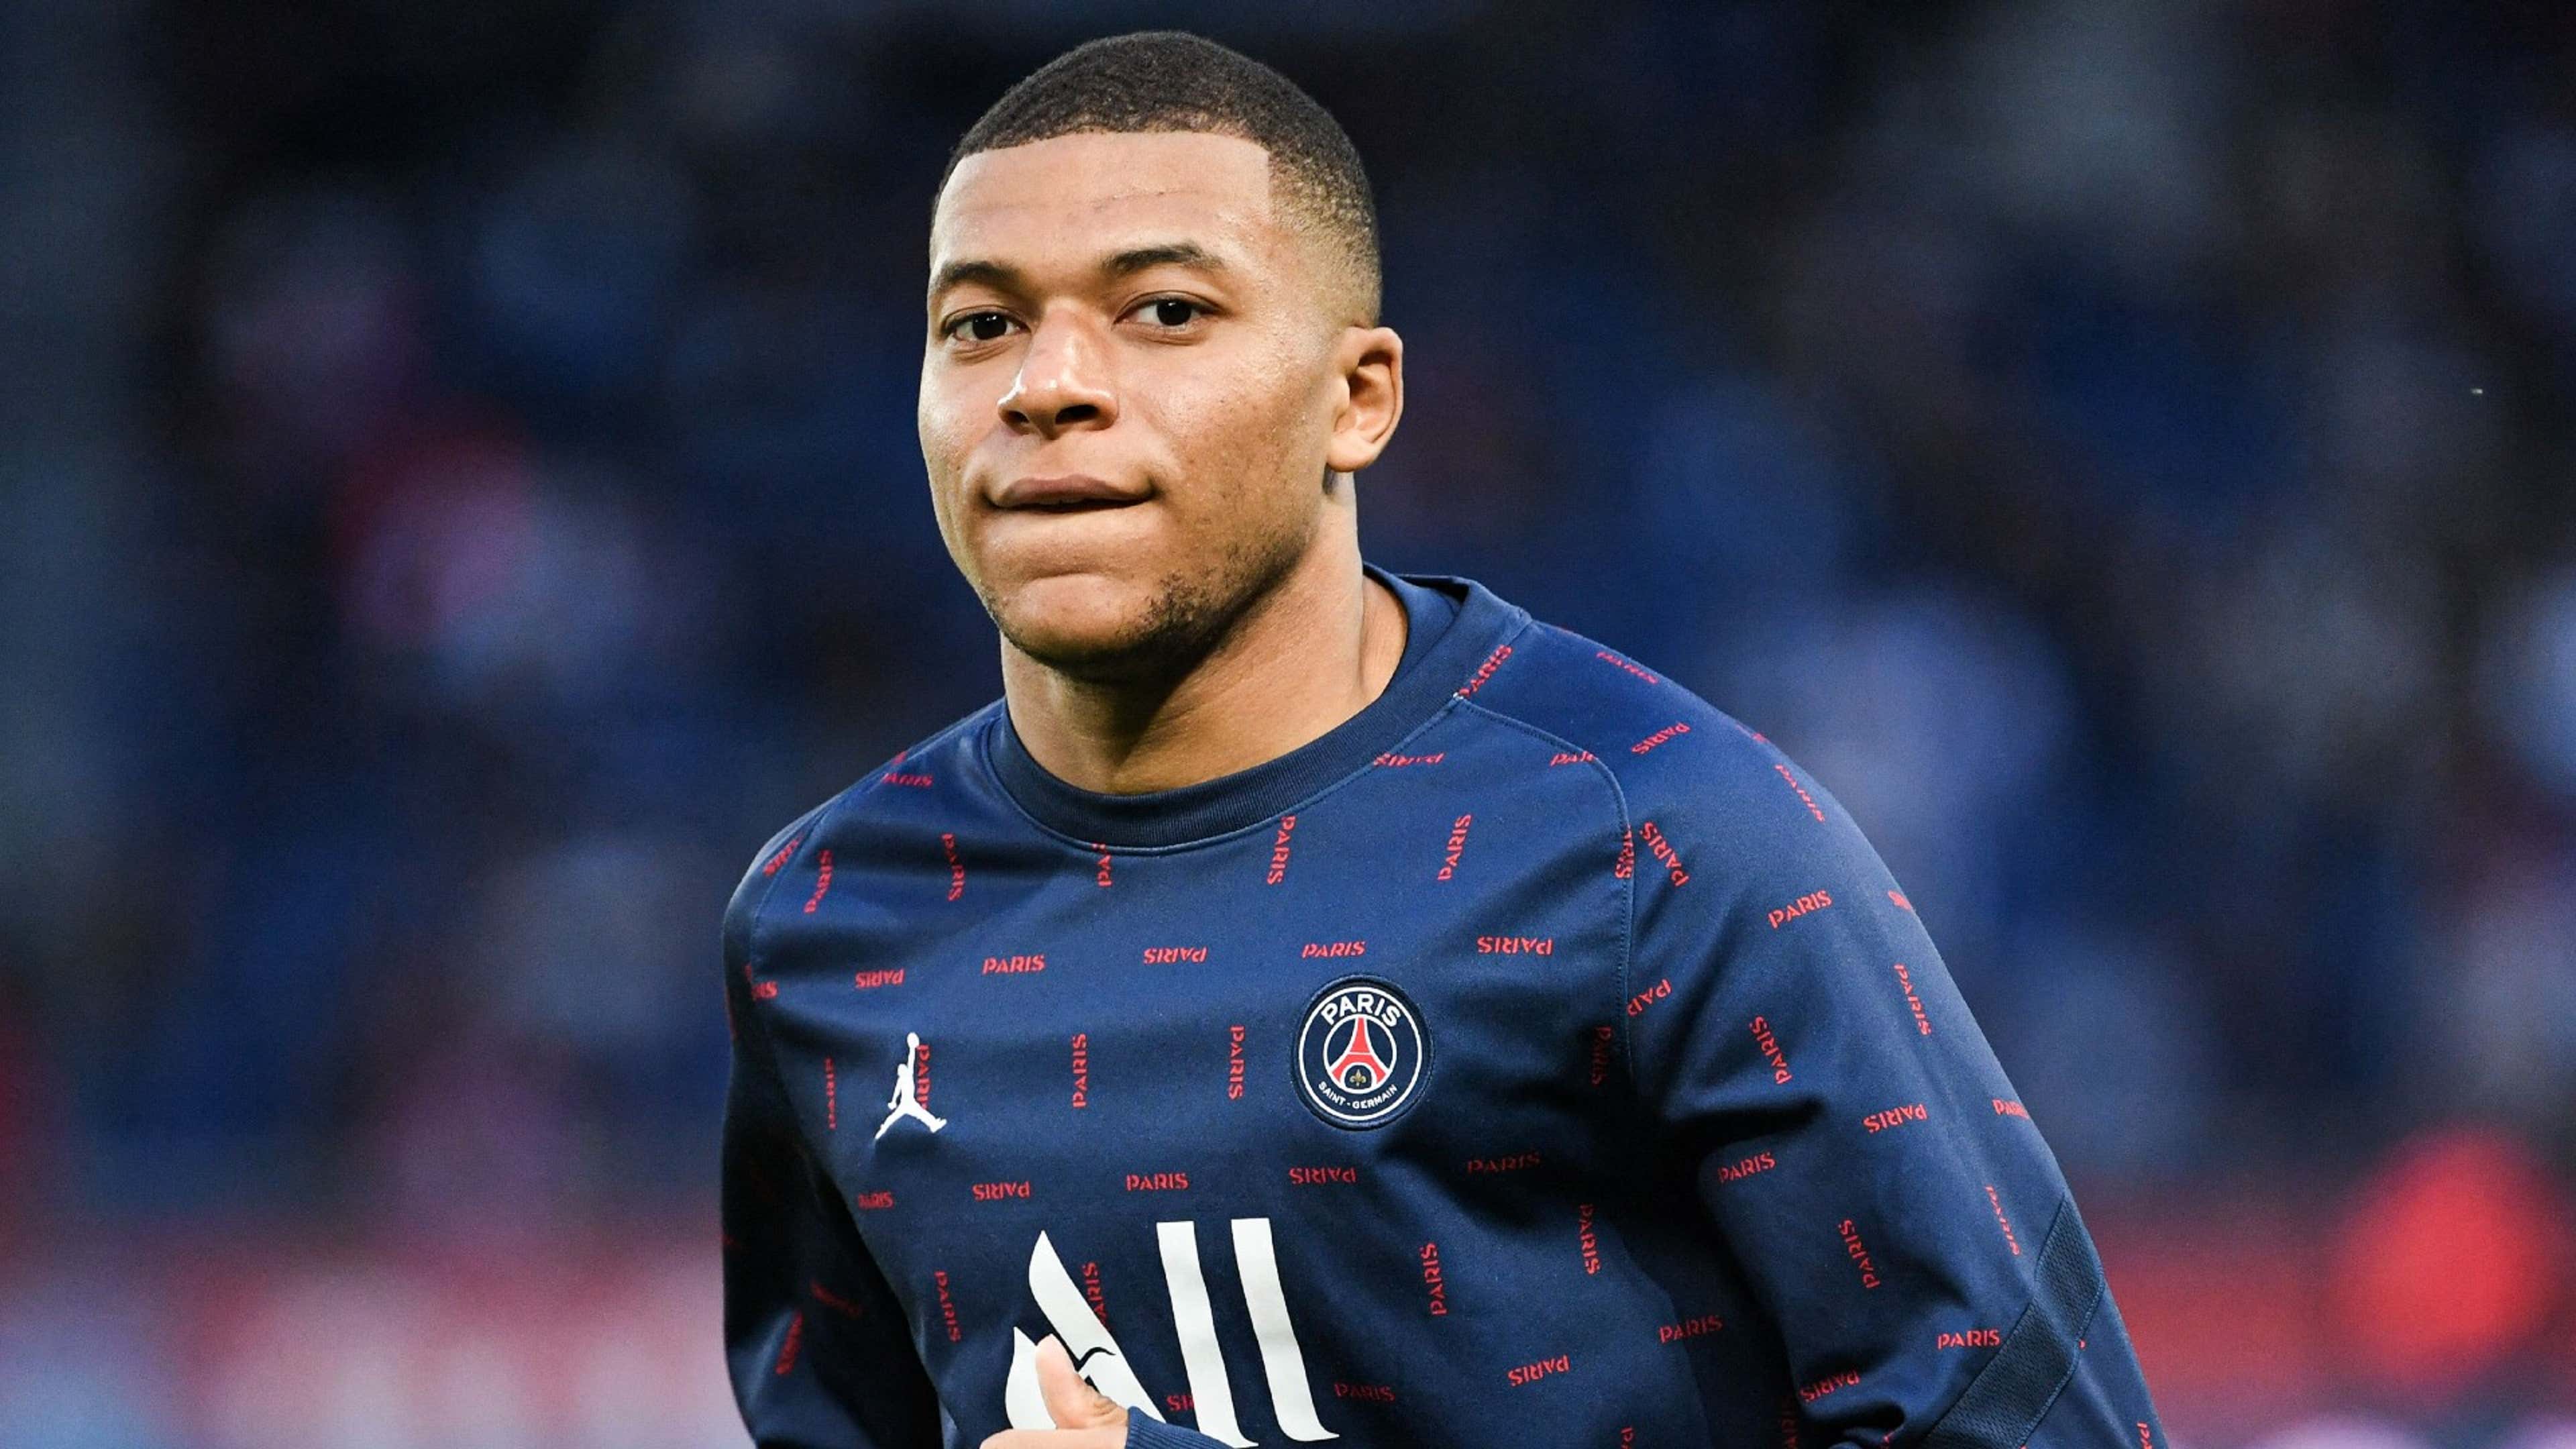 Journalist Names PSG Star the Best Player in the World - PSG Talk